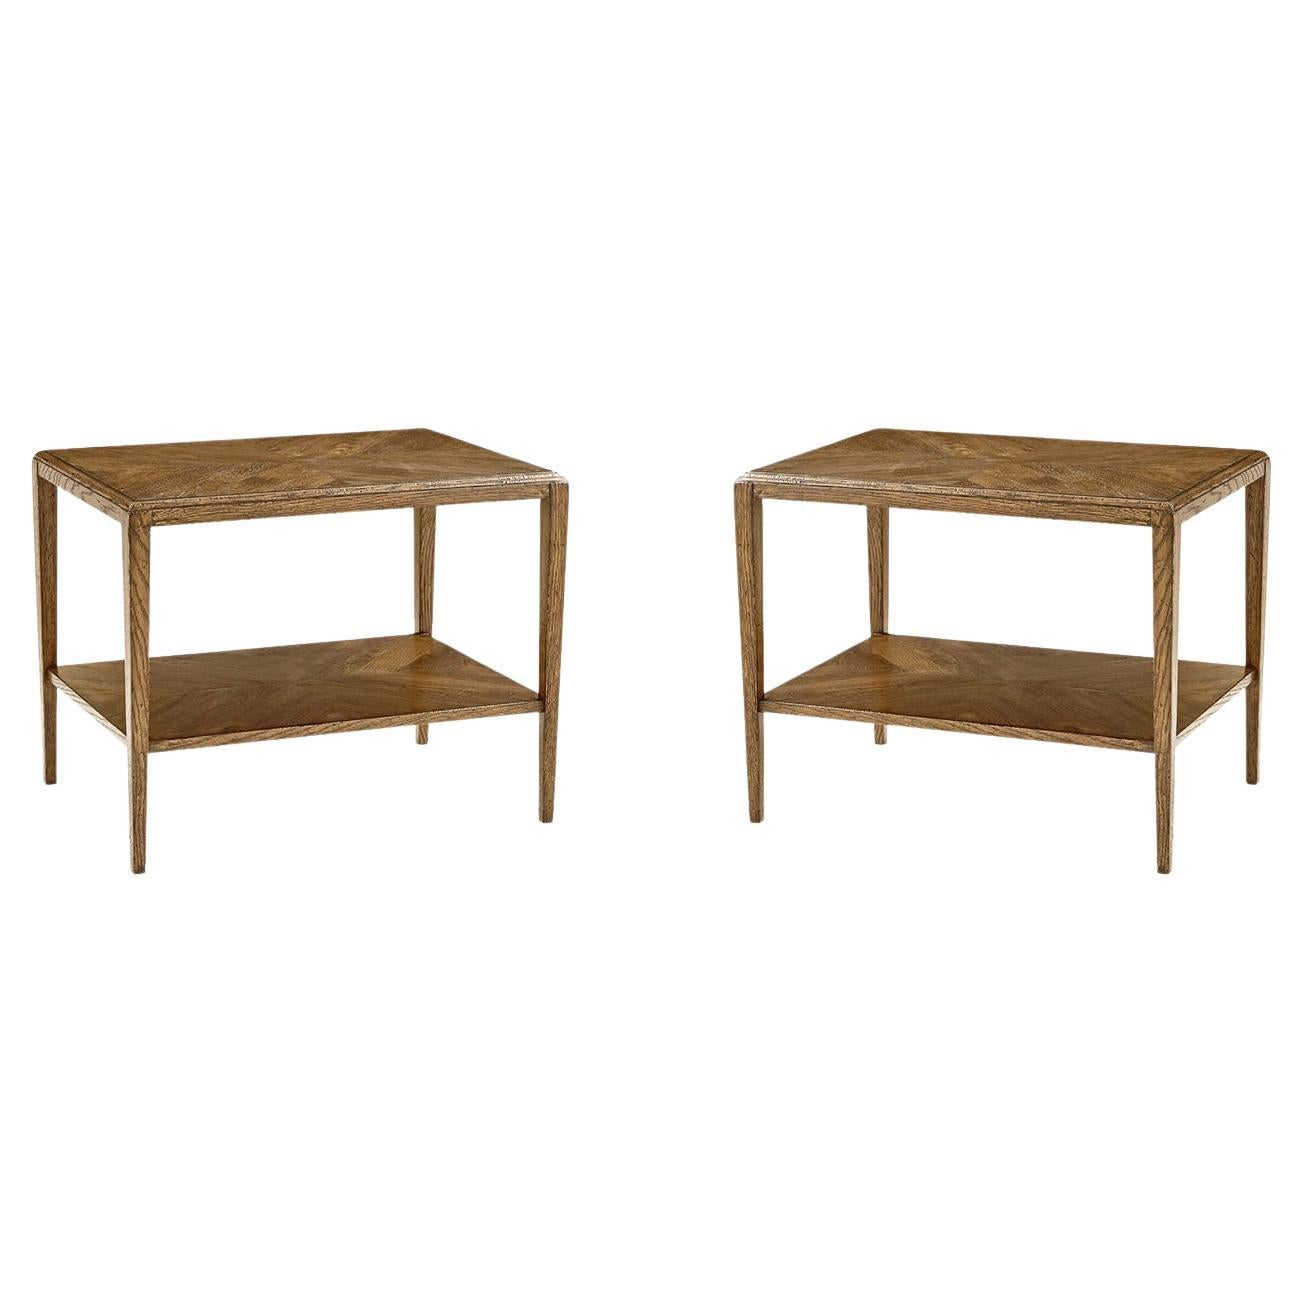 Pair of Rustic Oak Two-Tier Side Tables